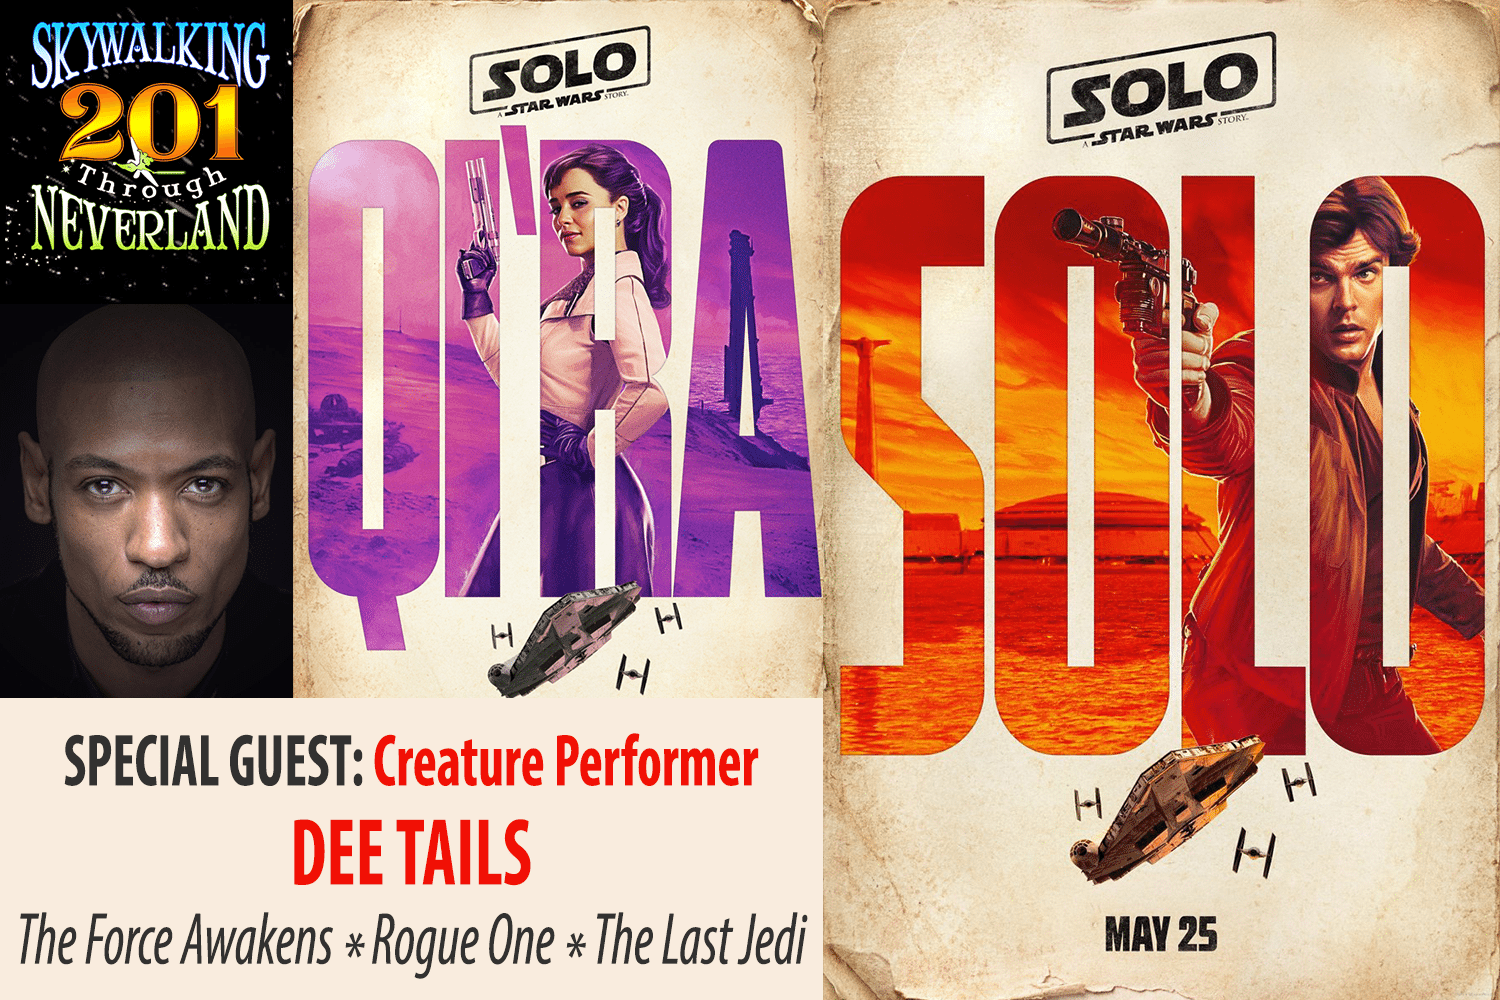 Skywalking Through Neverland #201: SOLO Teaser Talk with Creature Performer Dee Tails